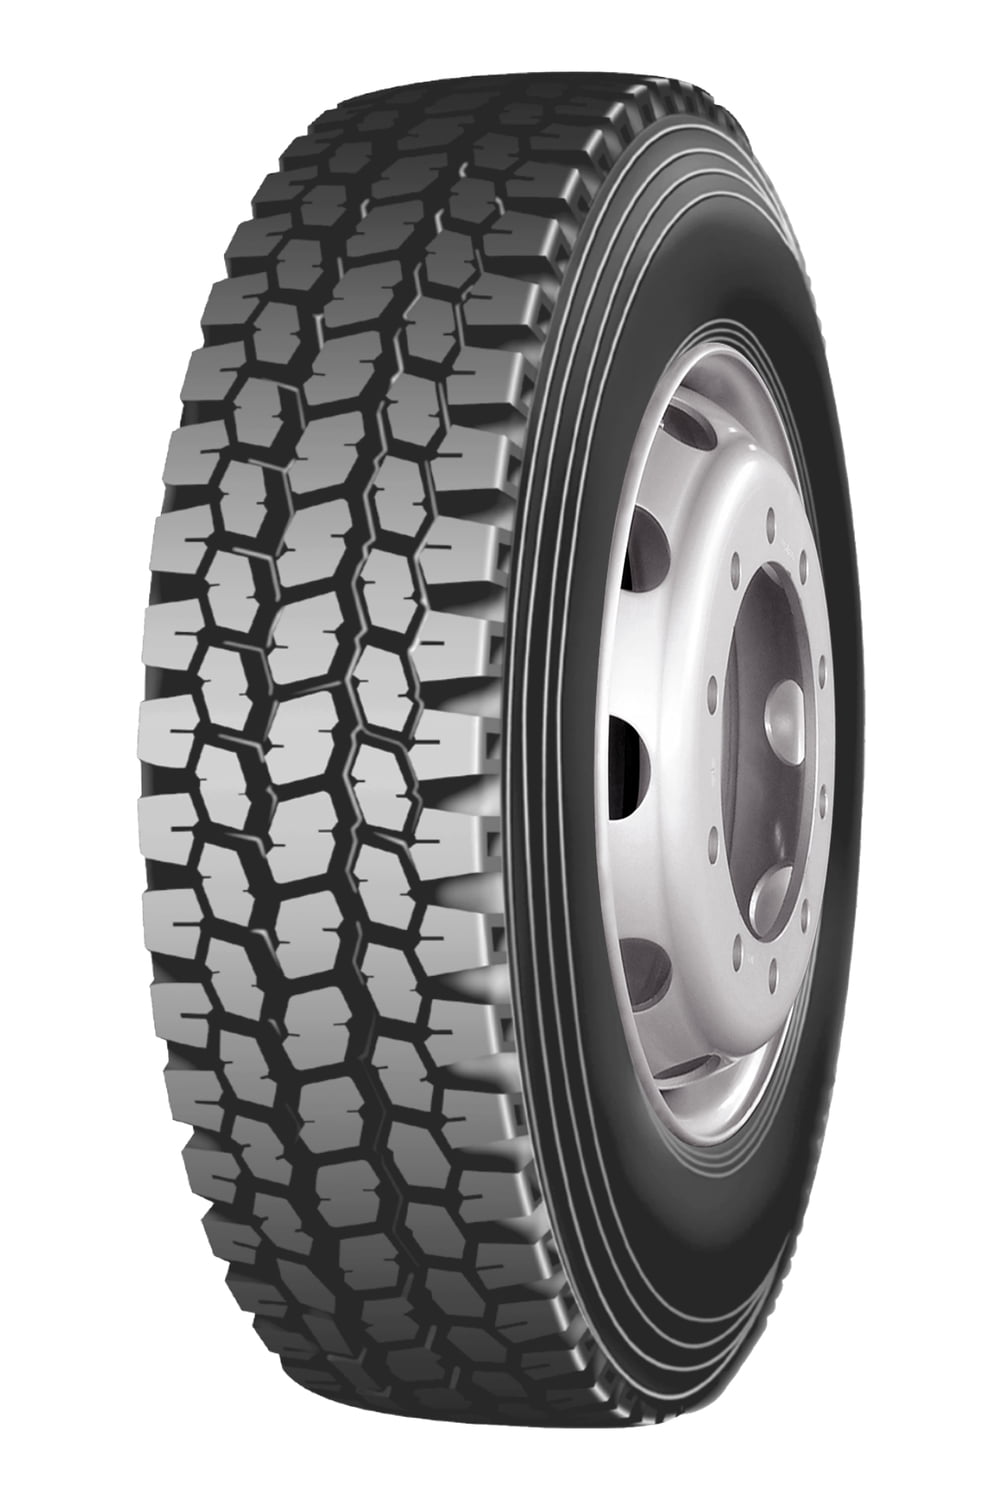 Double Coin RLB400 Closed Shoulder Drive-Position Commercial Radial Truck Tire 285/75R24.5 14 ply